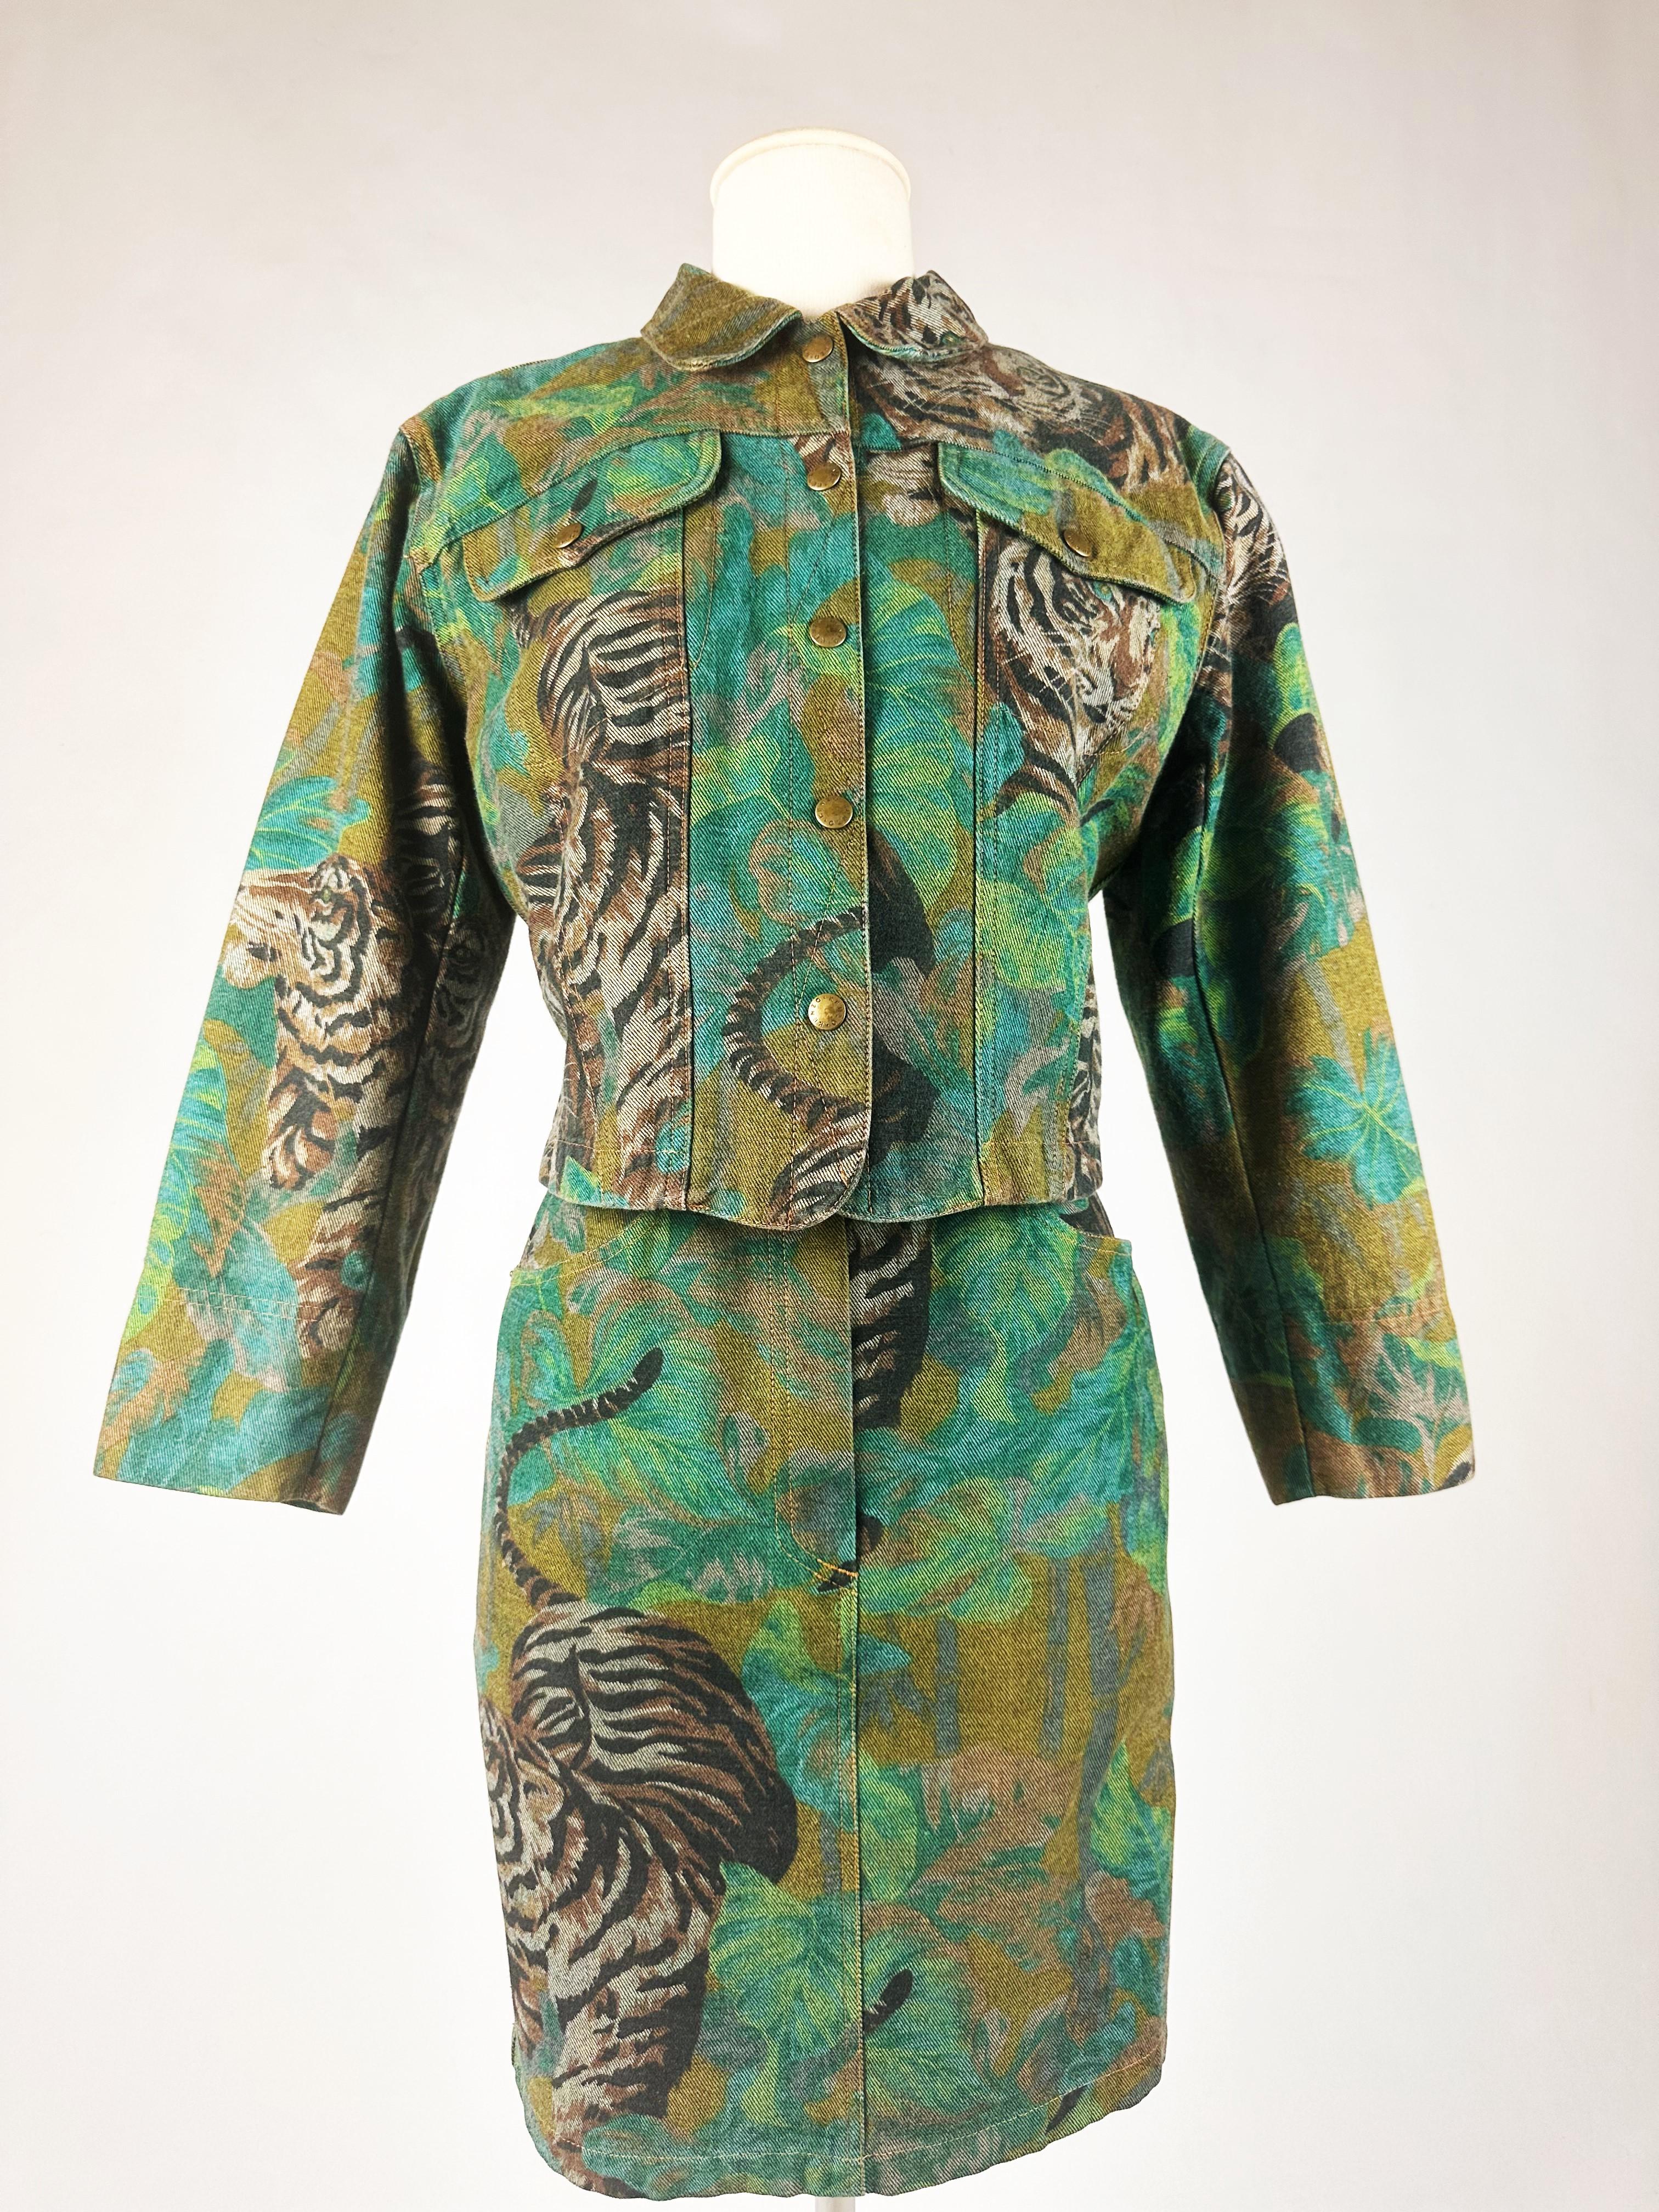 Circa 1990
France
Iconic denim jacket and skirt printed with Kenzo Takada's famous jungle and tiger motif, dating from the 1990s. Slim-fit jacket with double topstitching, back placket and two front flap pockets. Closes with five gold brass press